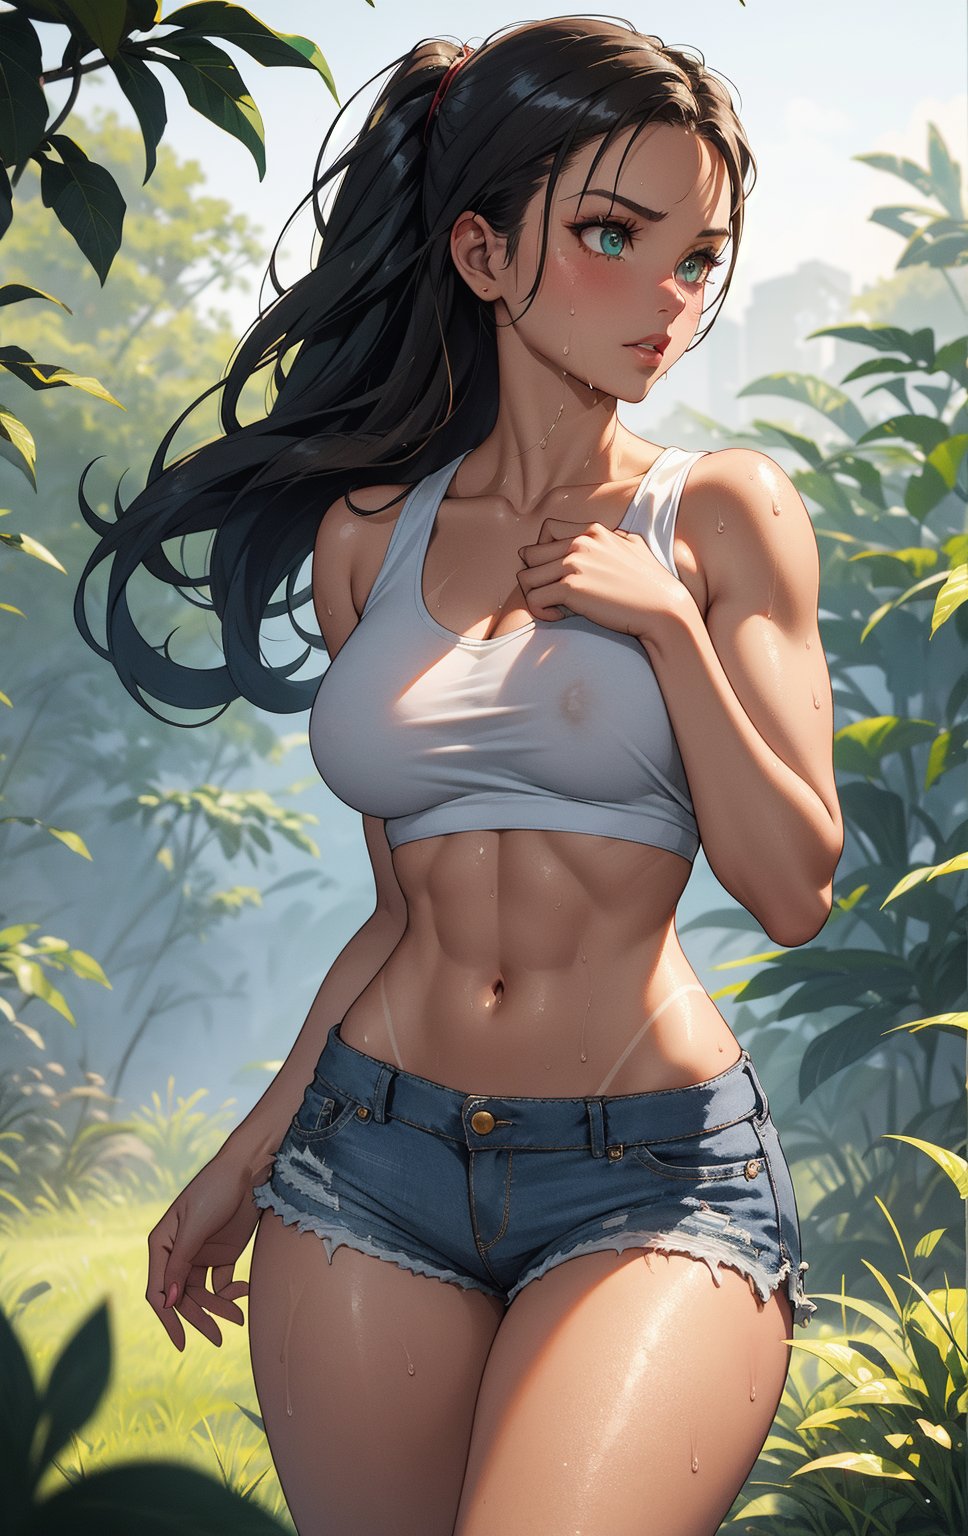 Close-up shot of Lara Croft standing in a lush green field, sweat glistening on her sun-kissed skin as she holds her hair with confidence. Her iconic tank top, now wet and transparent and clinging to her curves, accentuates her toned physique. Ripped shorts reveal a tantalizing glimpse of her toned legs, drawing attention to her athletic build. The camera lingers on her striking features, capturing the fierce determination in her eyes as she surveys the landscape. The warm sunlight casts a golden glow, highlighting the rugged beauty of this action heroine.